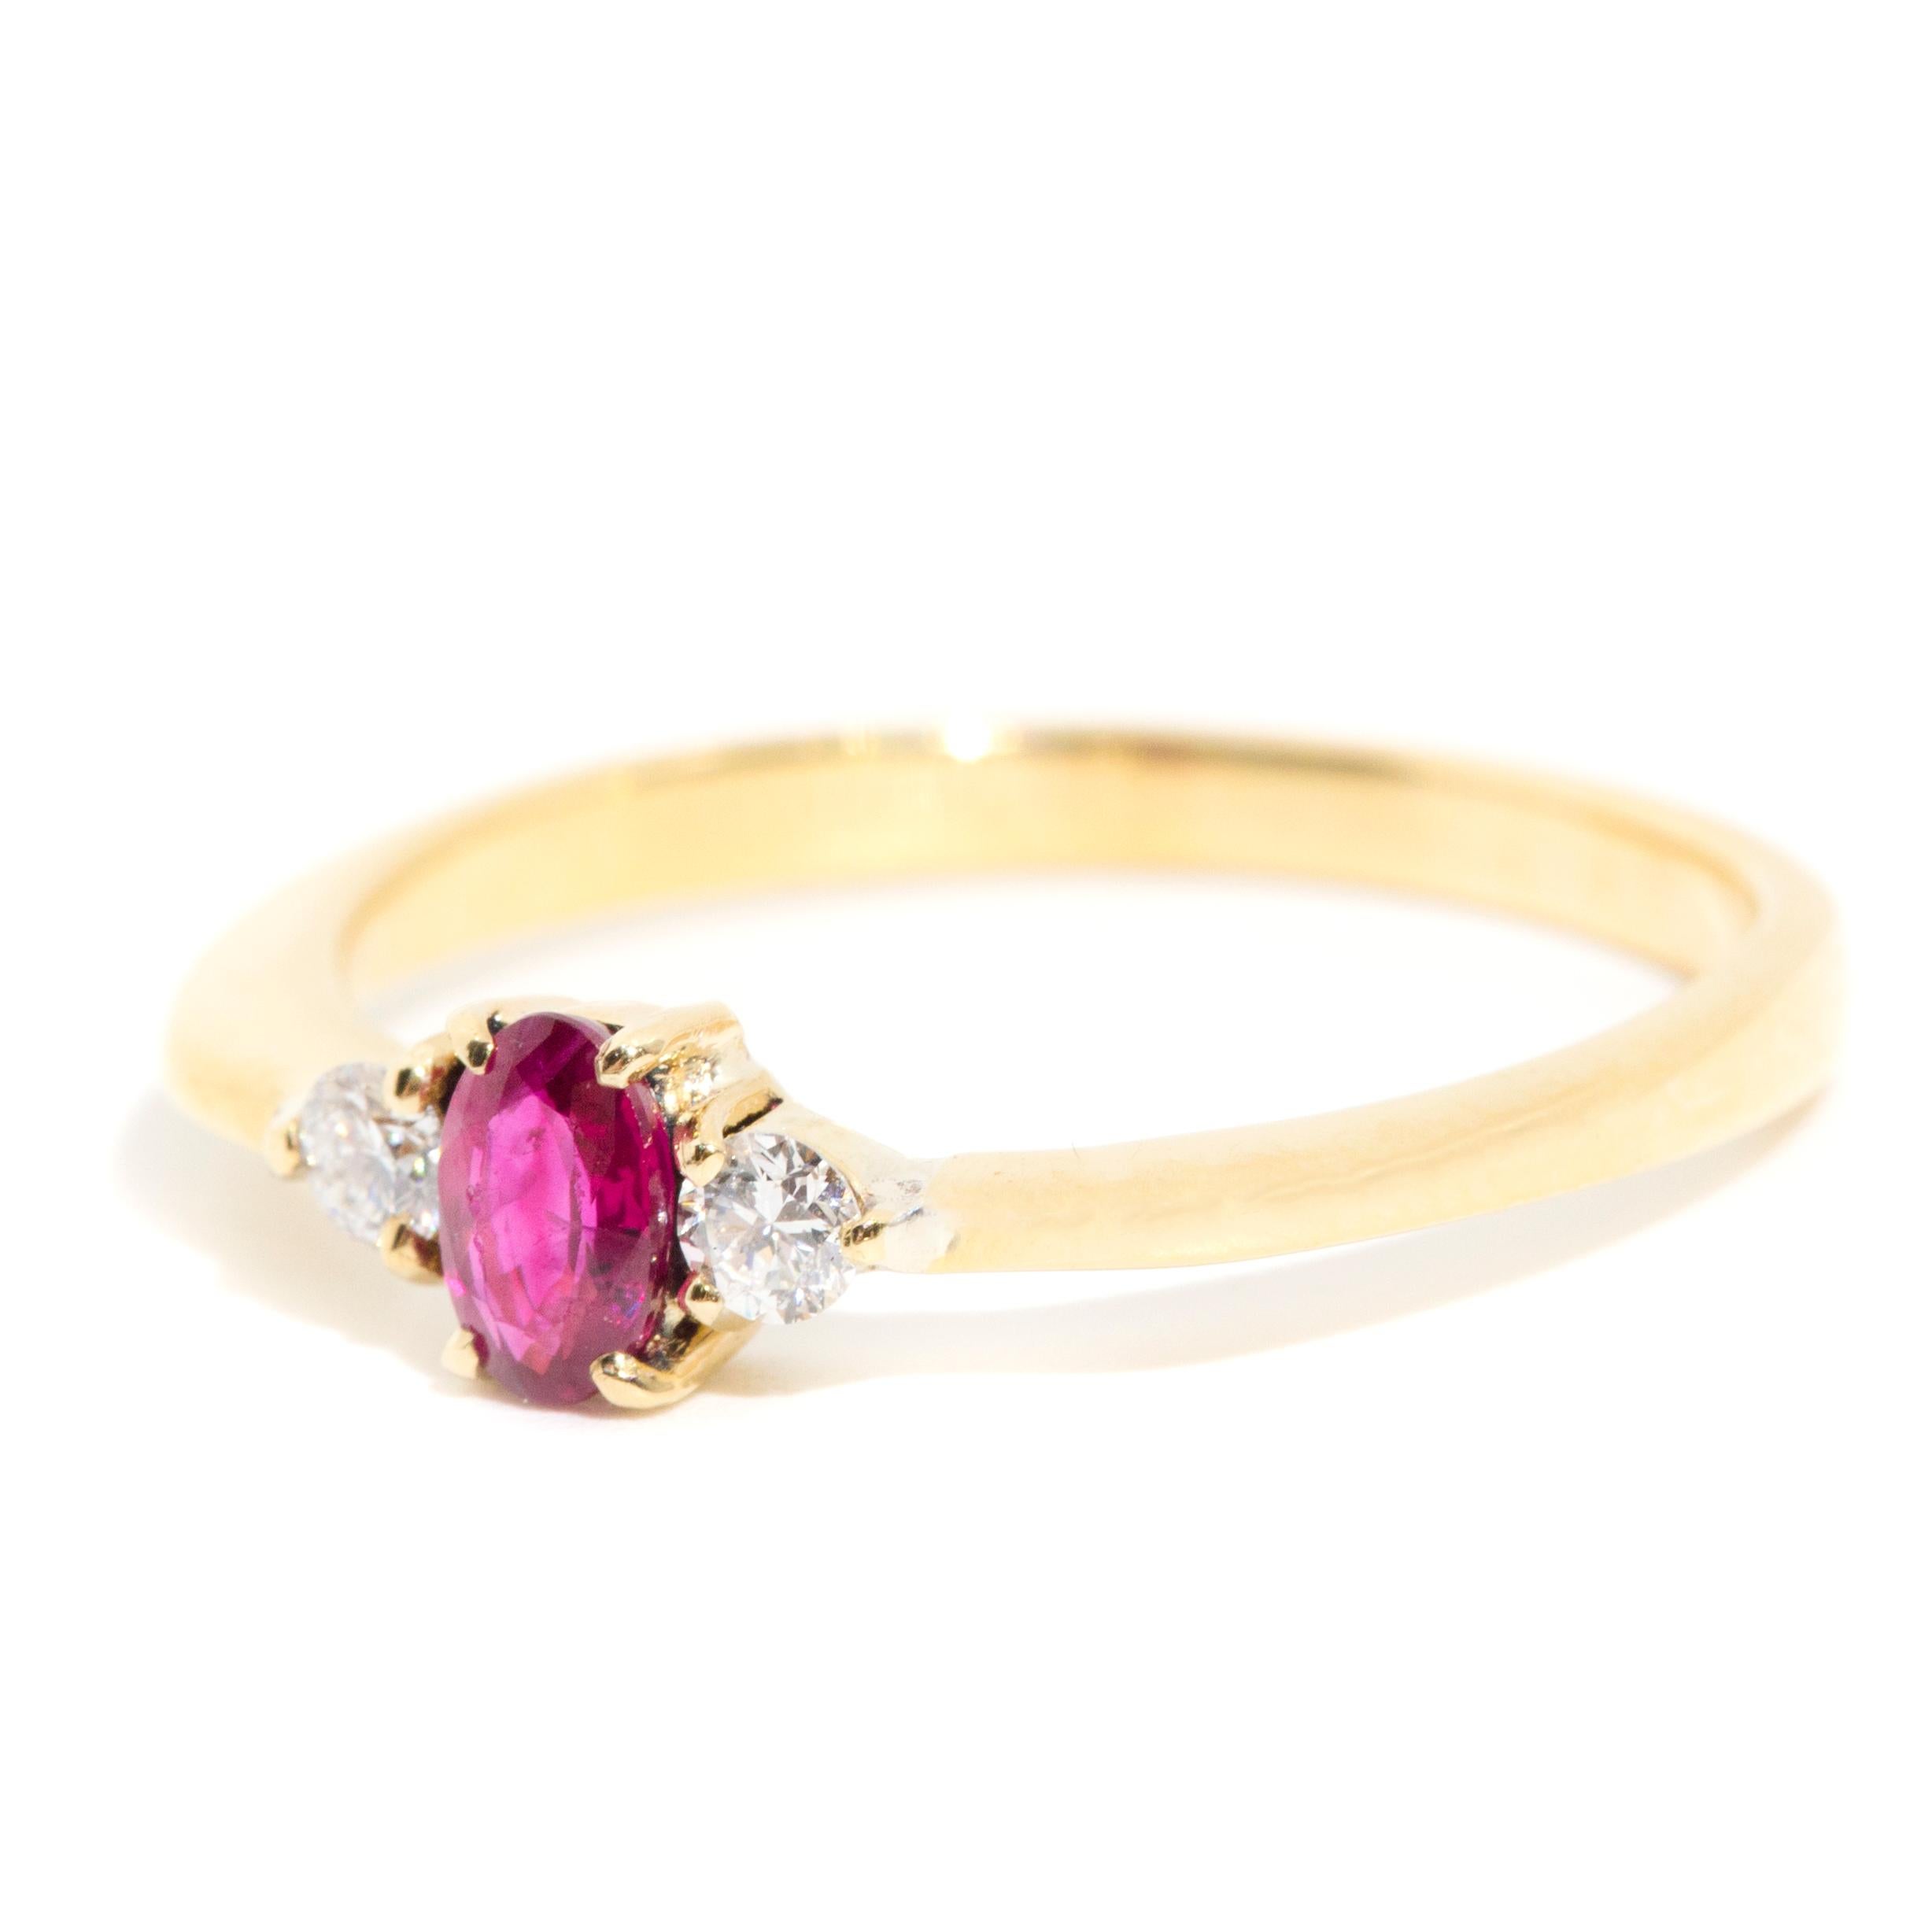 Carefully crafted in 14 carat yellow gold is this three stone vintage ring featuring one bright red oval natural Ruby flanked with two darling round brilliant cut diamonds. We have named this charming vintage ring The Tyla Ring. The Tyla Ring